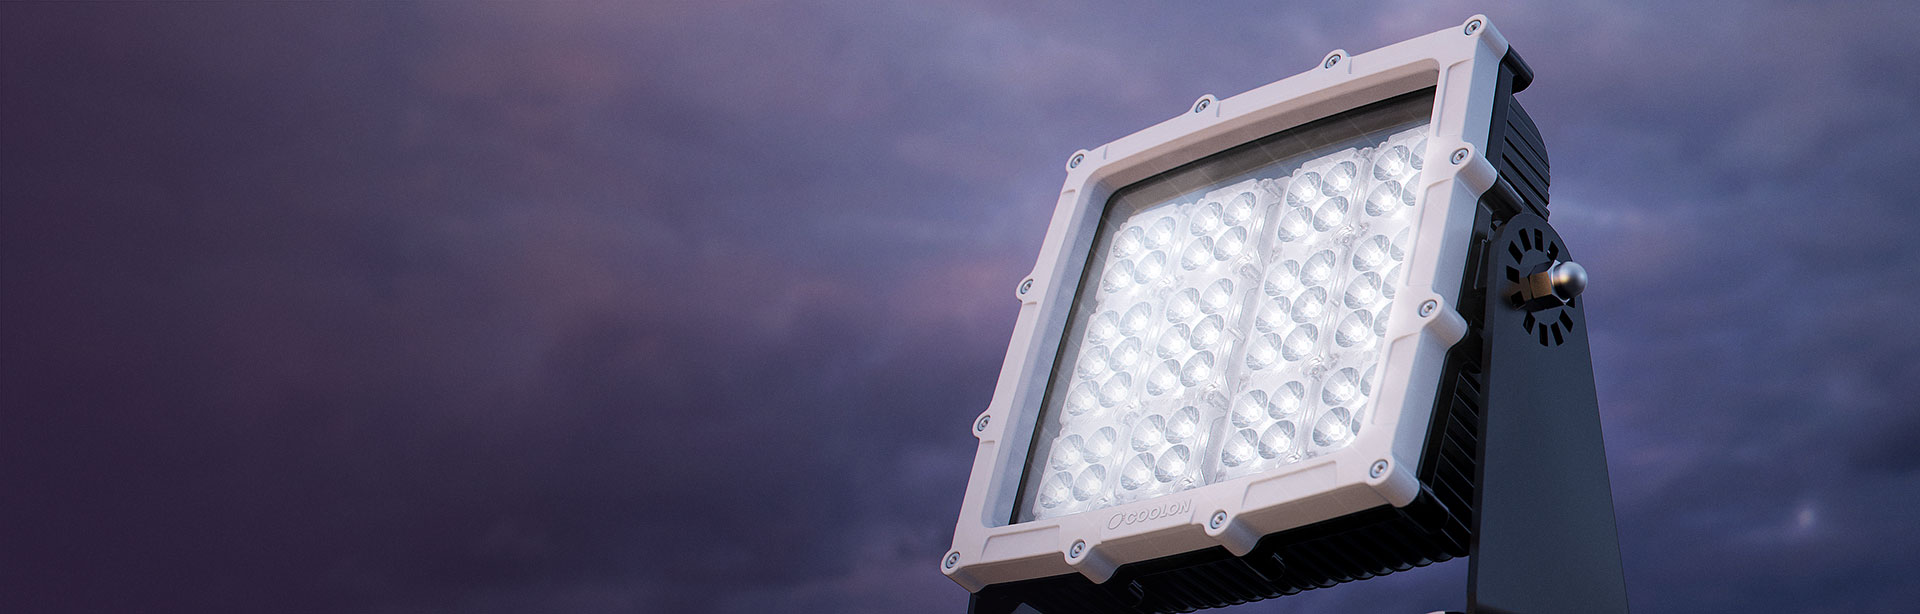 The high lumen output and narrow beam optics of the CP66 LED mining floodlight allows a single tower to illuminate extremely large areas. The power supply unit can be positioned separately for easy maintenance.